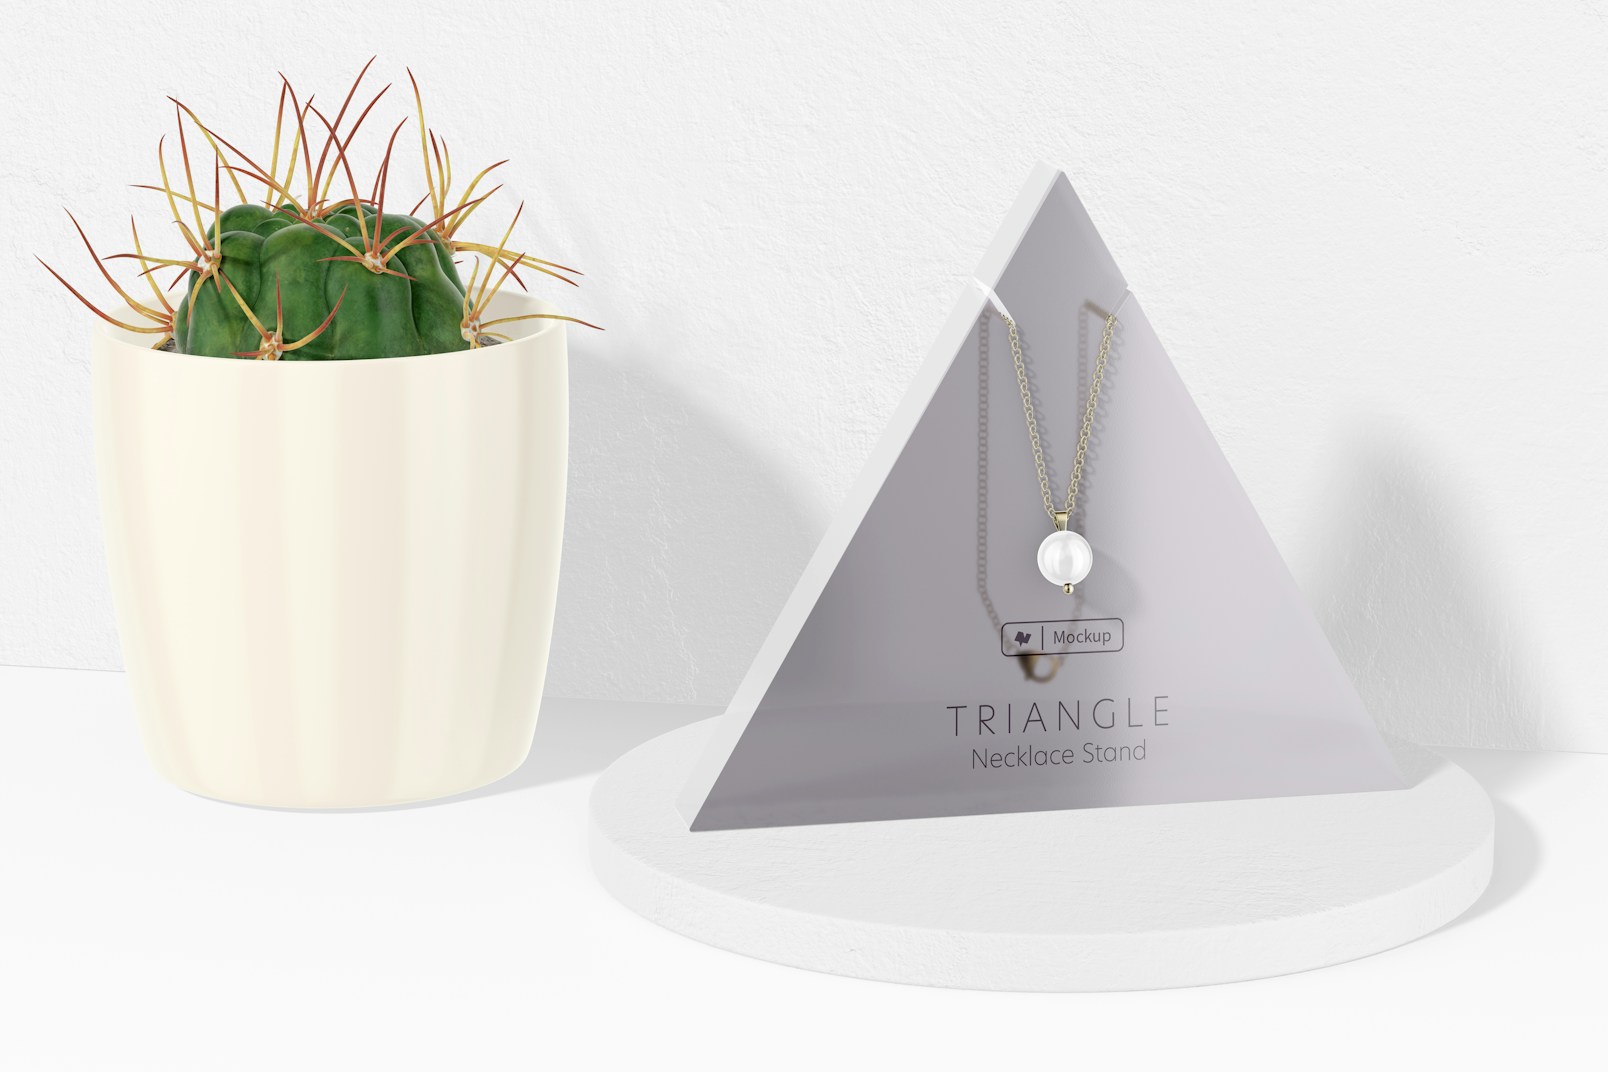 Triangle Necklace Display Stand Mockup, with Plant Pot